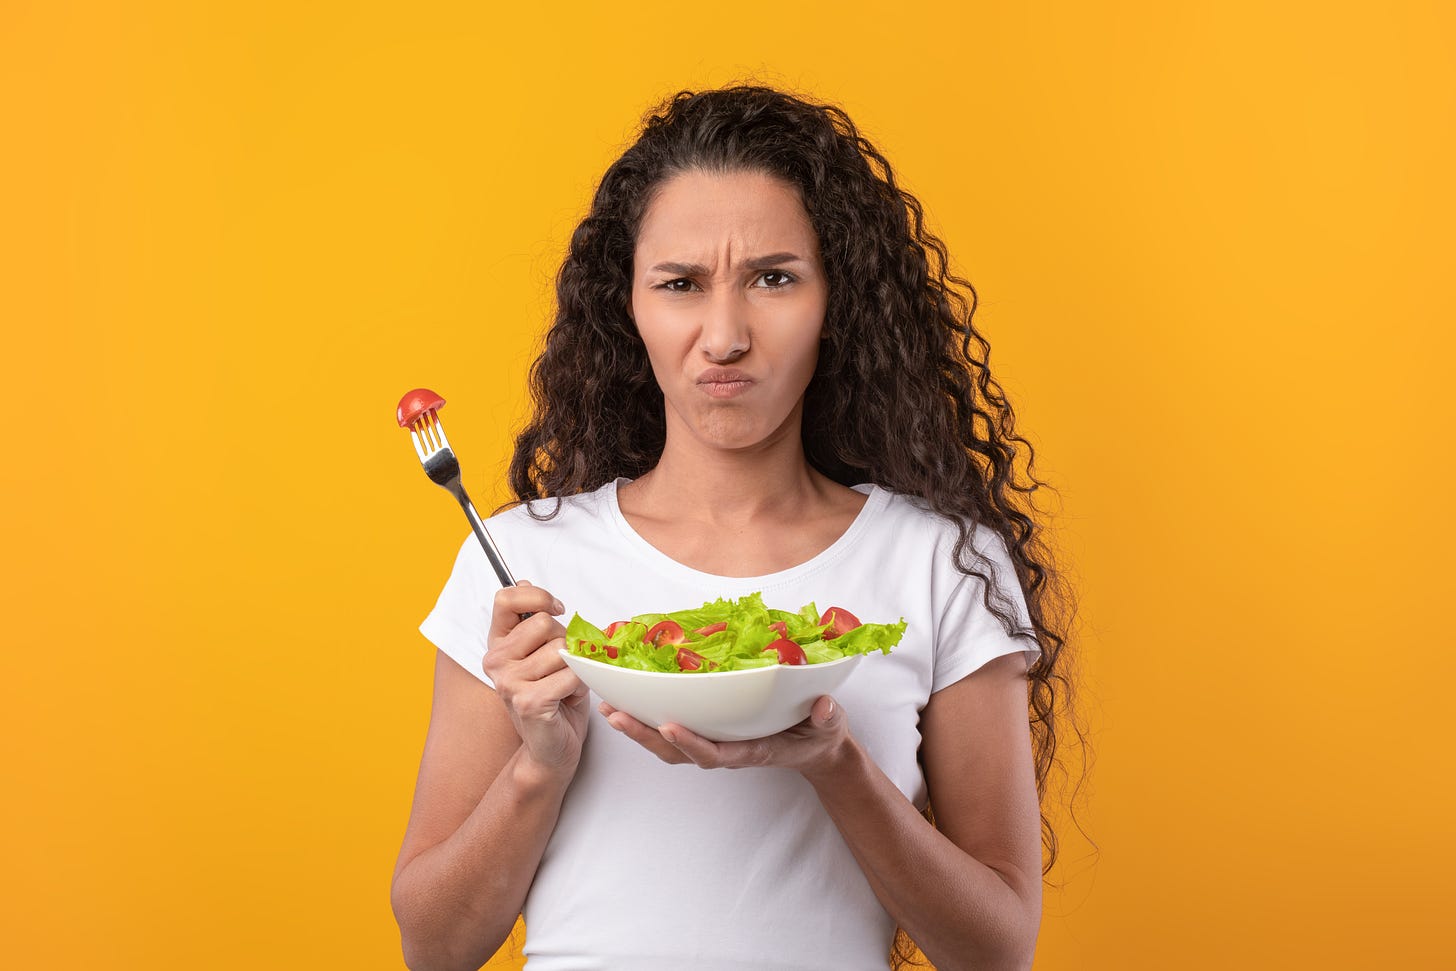 Woman holding a bowl of vegetables, looking skeptical